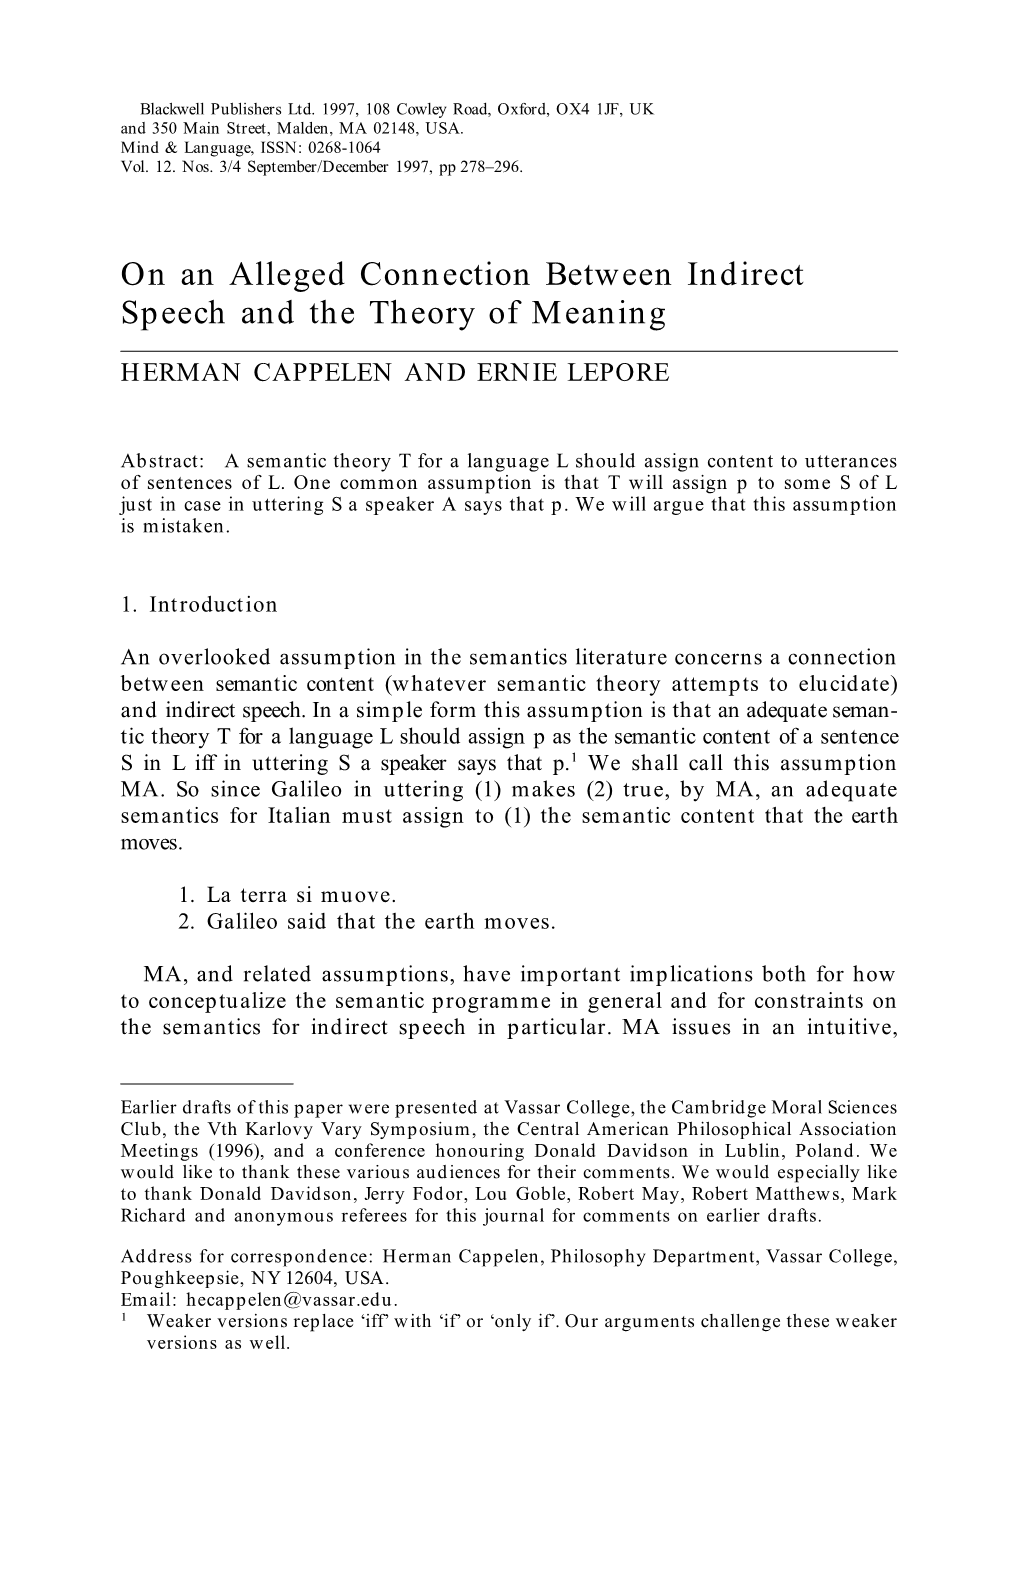 On an Alleged Connection Between Indirect Speech and the Theory of Meaning